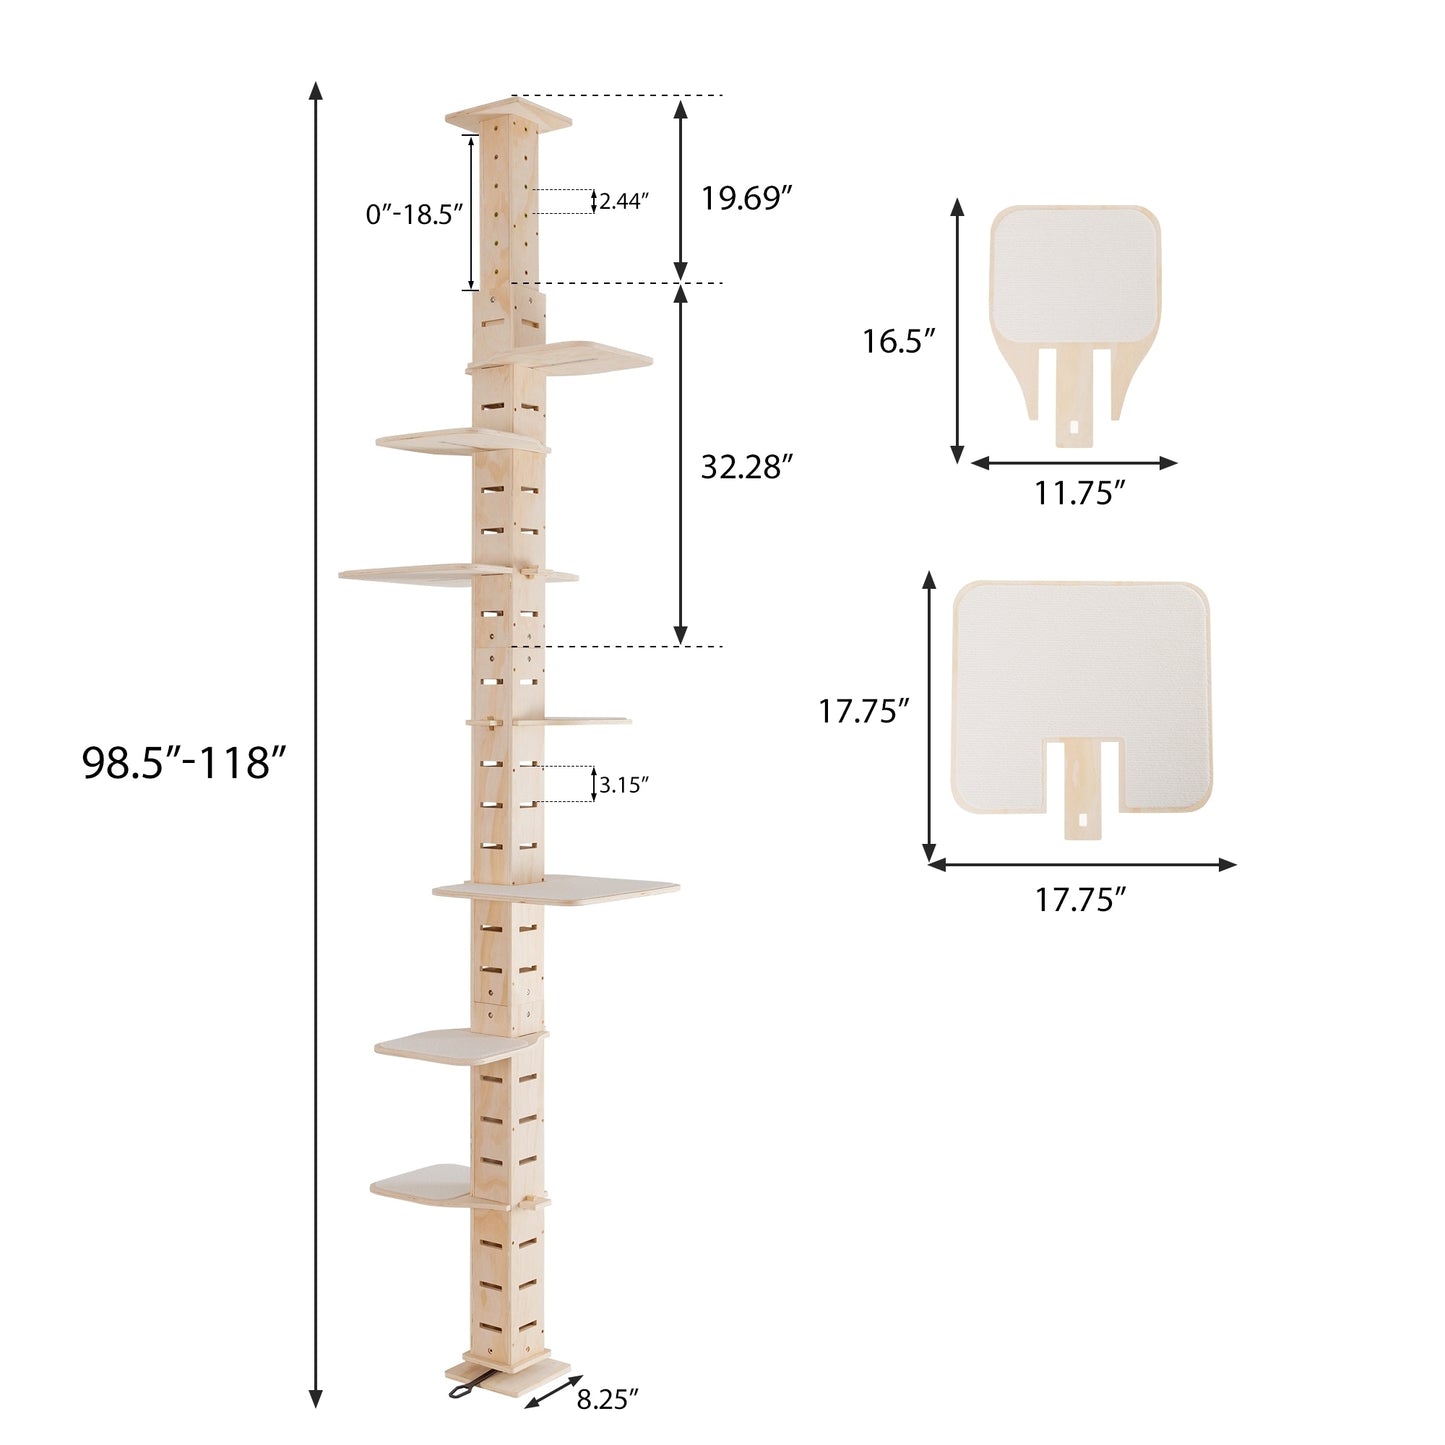 9' Adjustable Height Floor-to-Ceiling Cat Tree, Multi-Level Cat Vertical Cat Condo, Cat Climbing Frame Activity Center with Perching Shelves for Indoor Cats, Natural